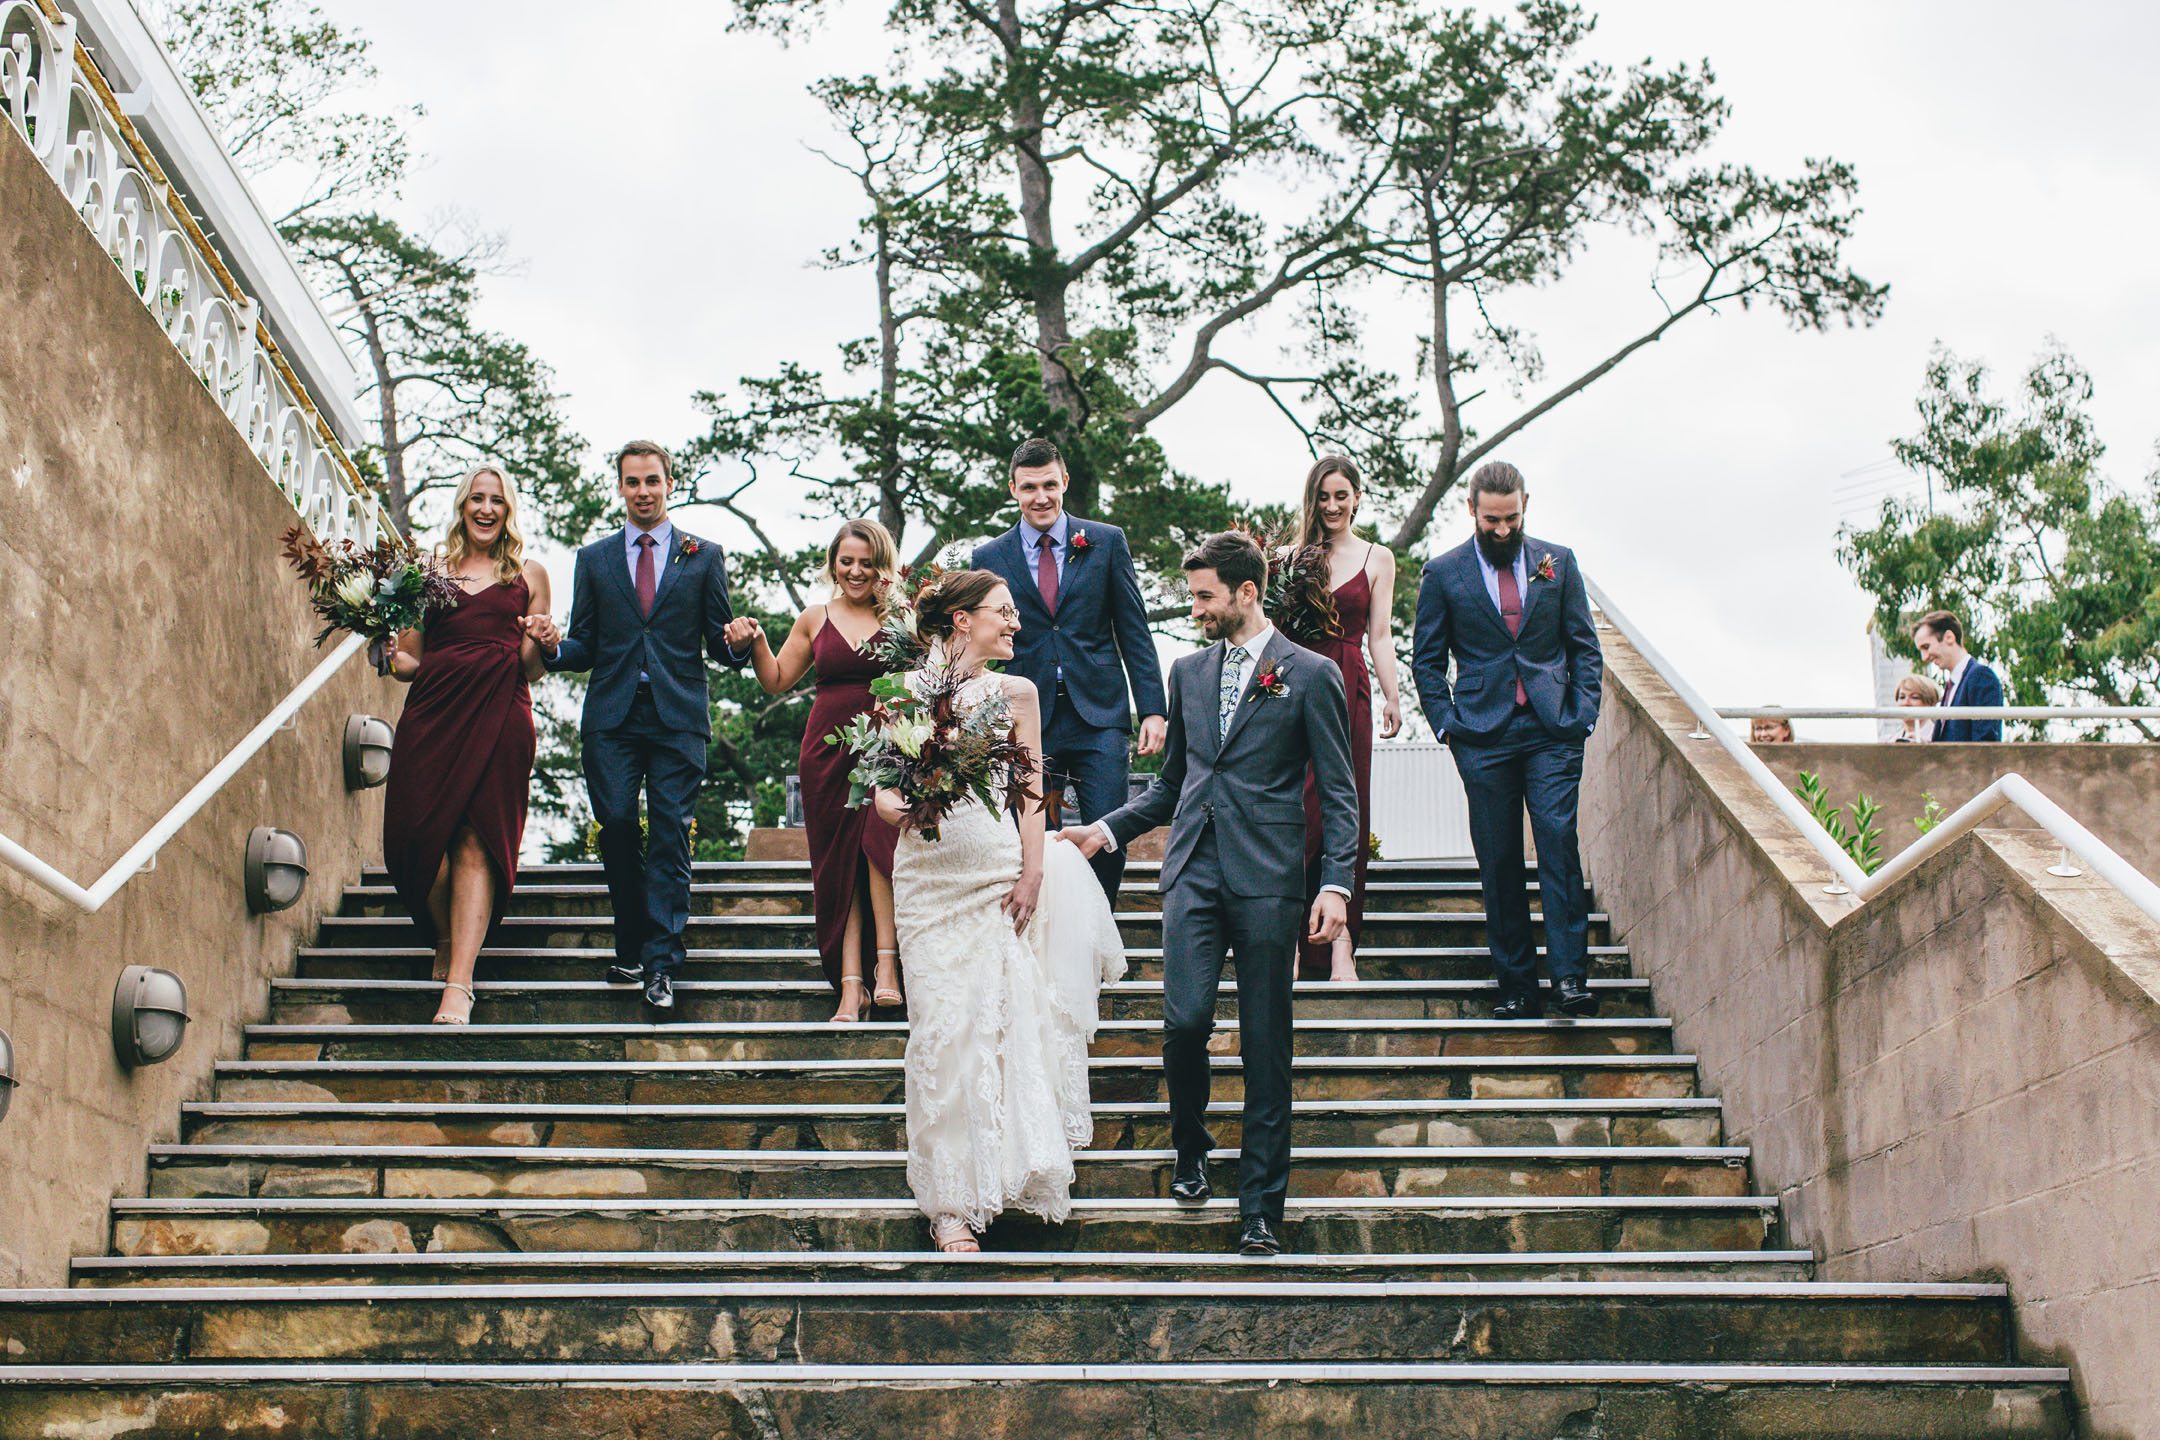 Bride & Groom walking down the stairs with their bridal party at Farm Vigano